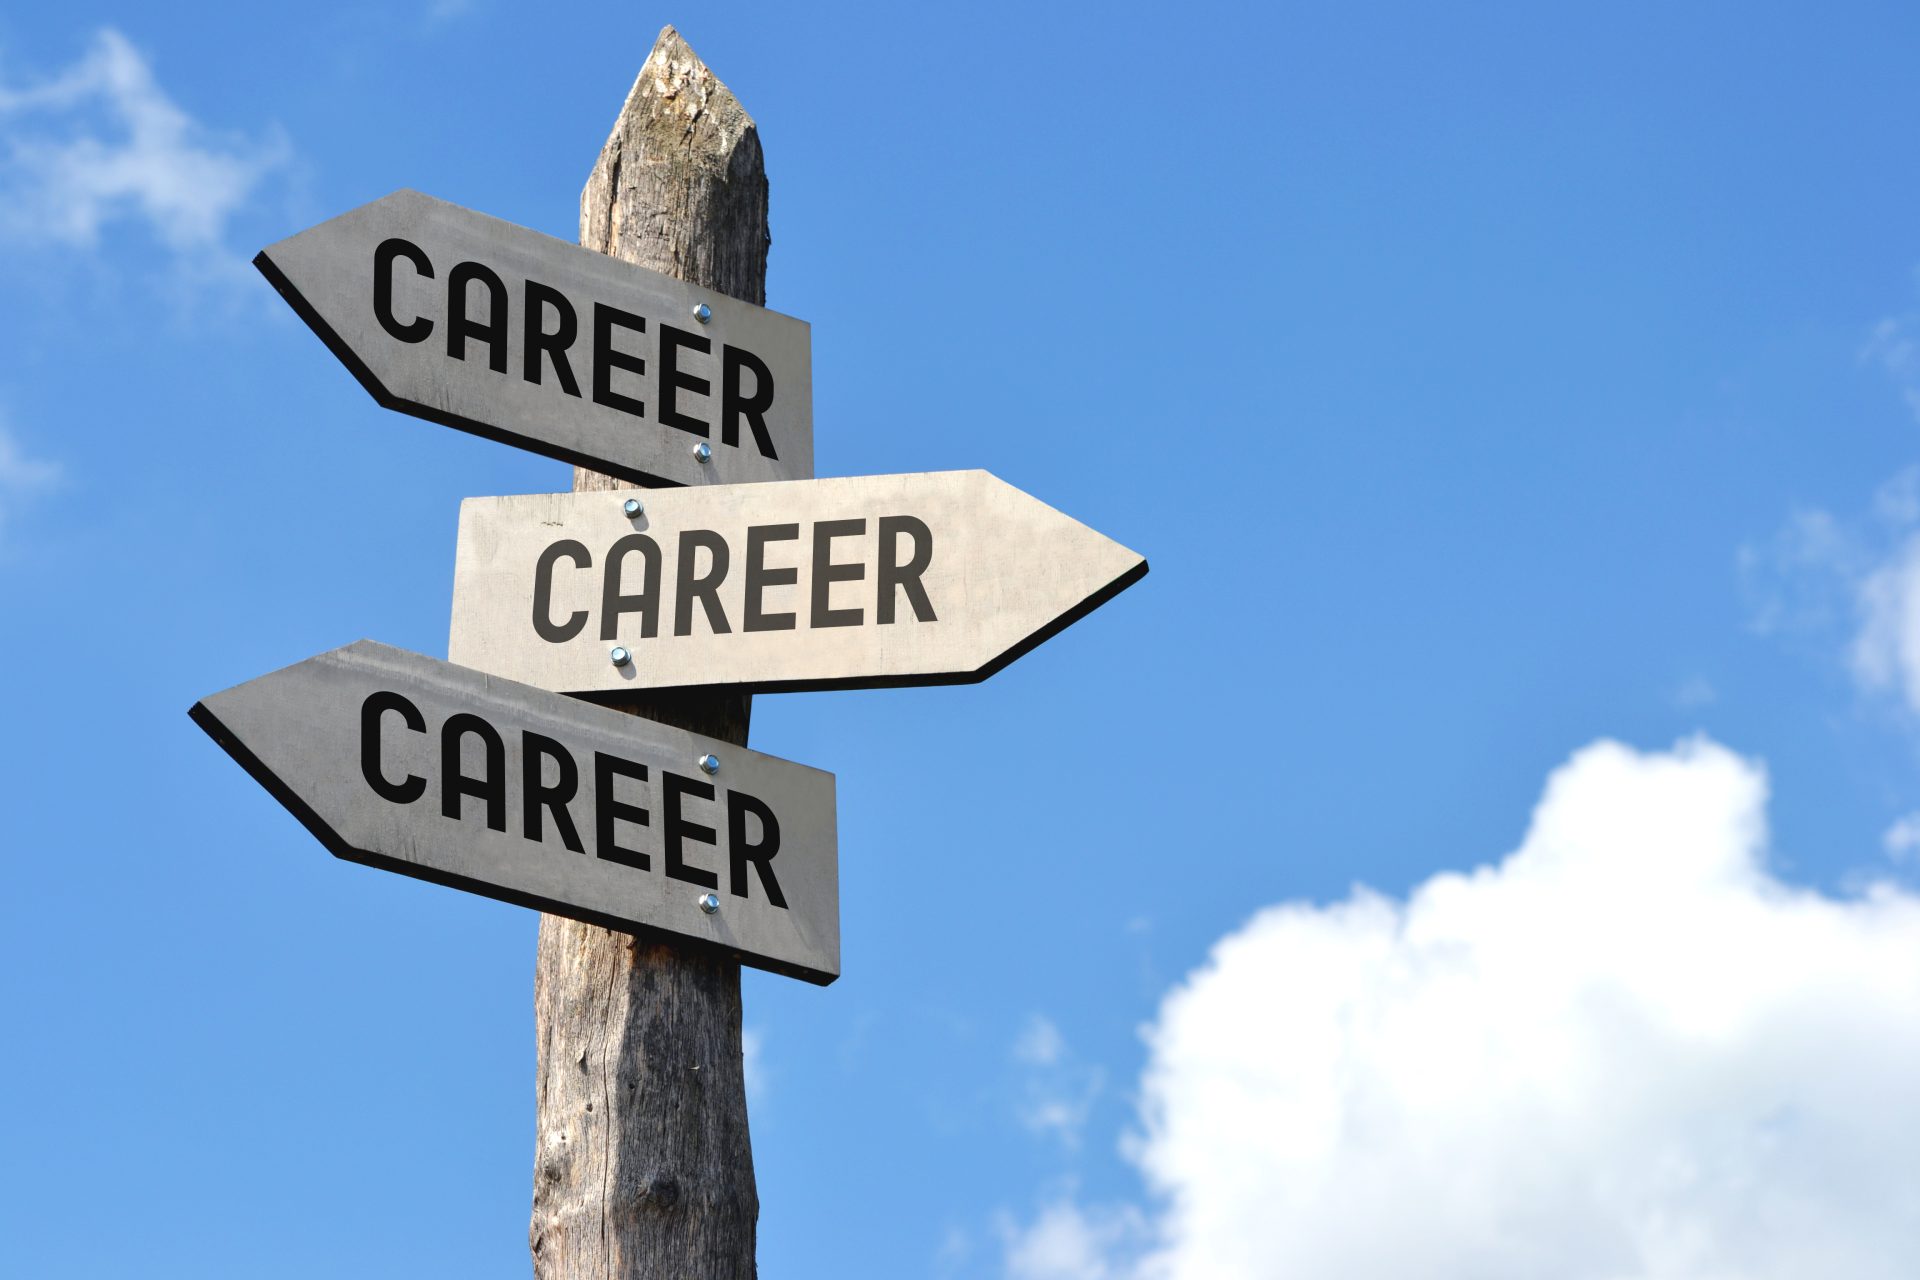 several signs that say 'career' pointing in different directions